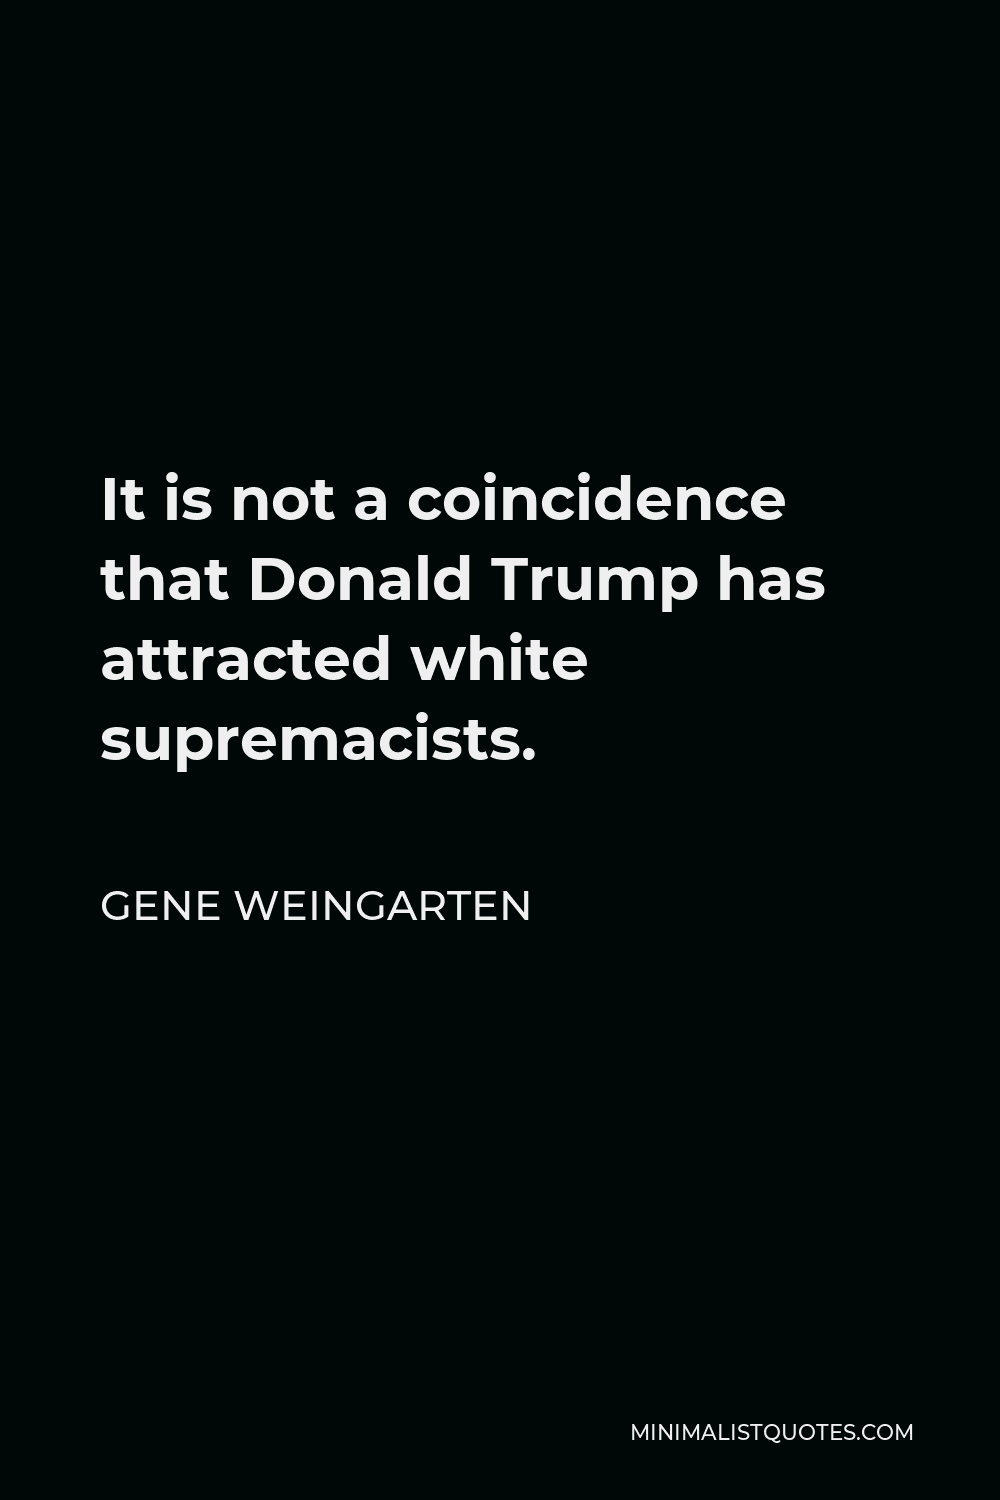 Gene Weingarten Quote - It is not a coincidence that Donald Trump has attracted white supremacists.